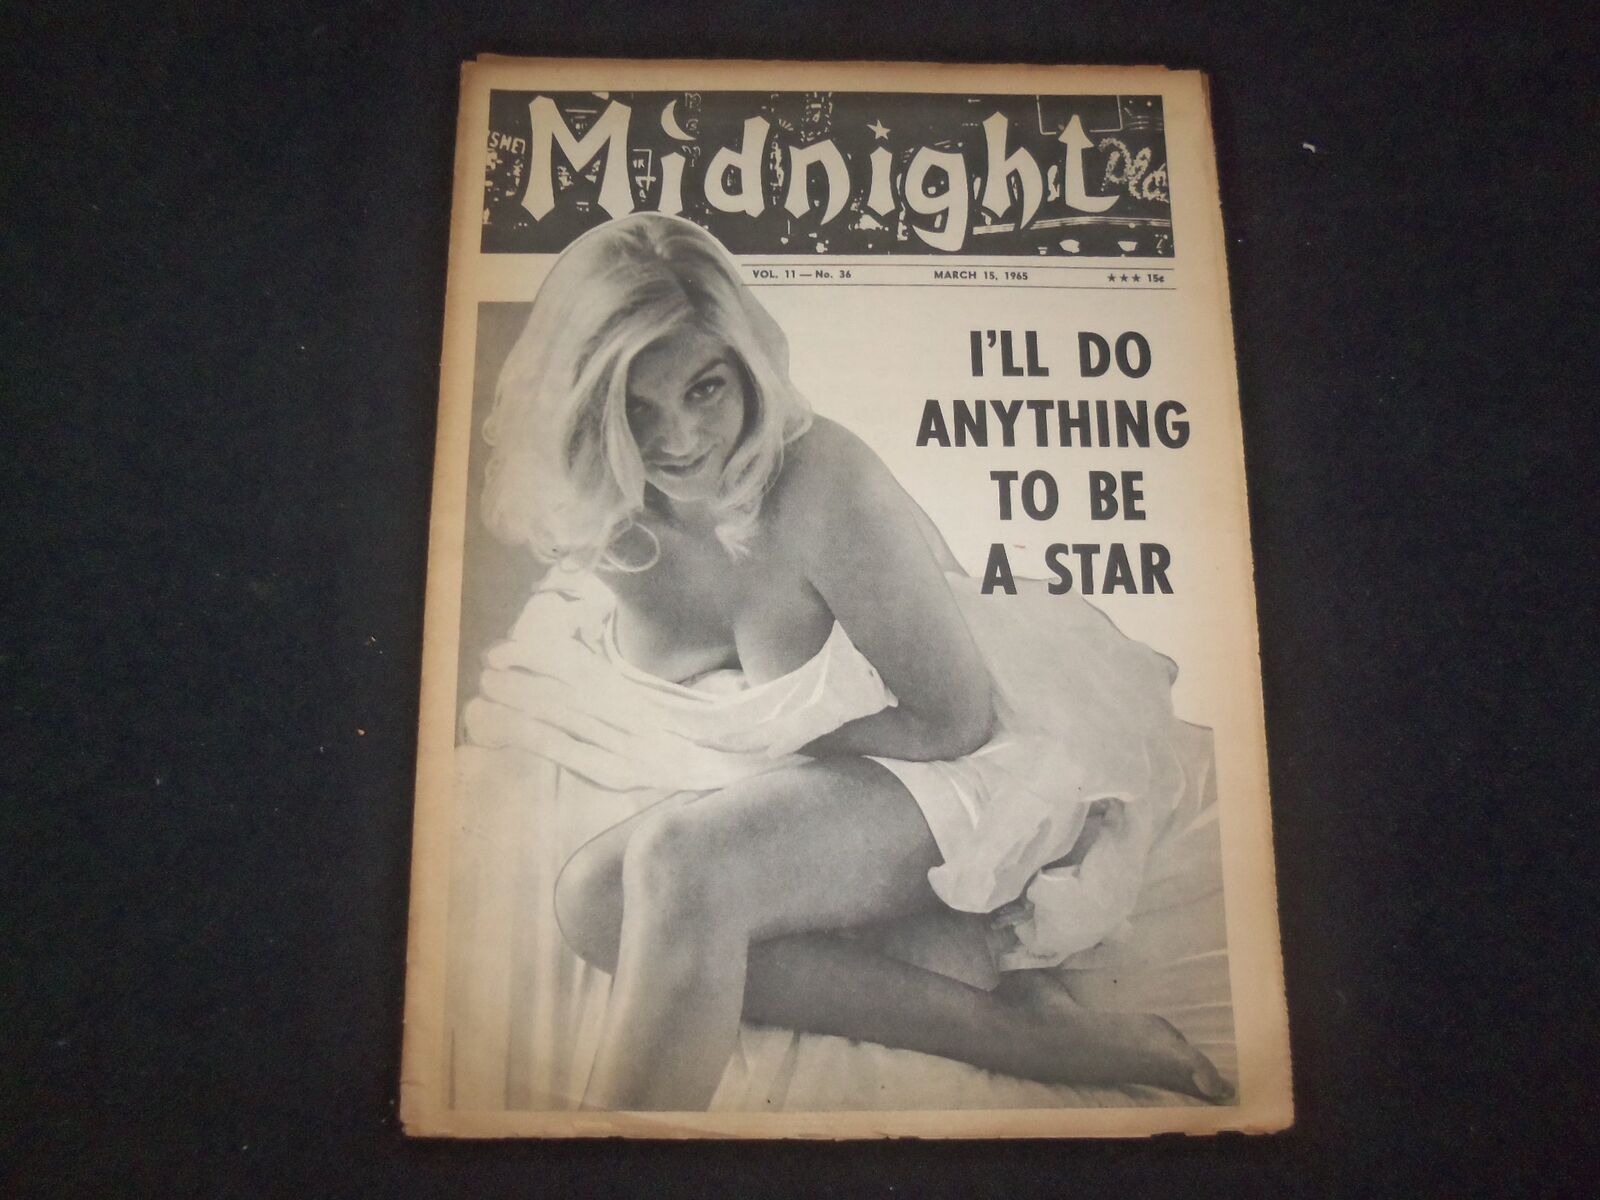 1965 MARCH 15 MIDNIGHT NEWSPAPER - I'LL DO ANYTHING TO BE A STAR - NP 7339